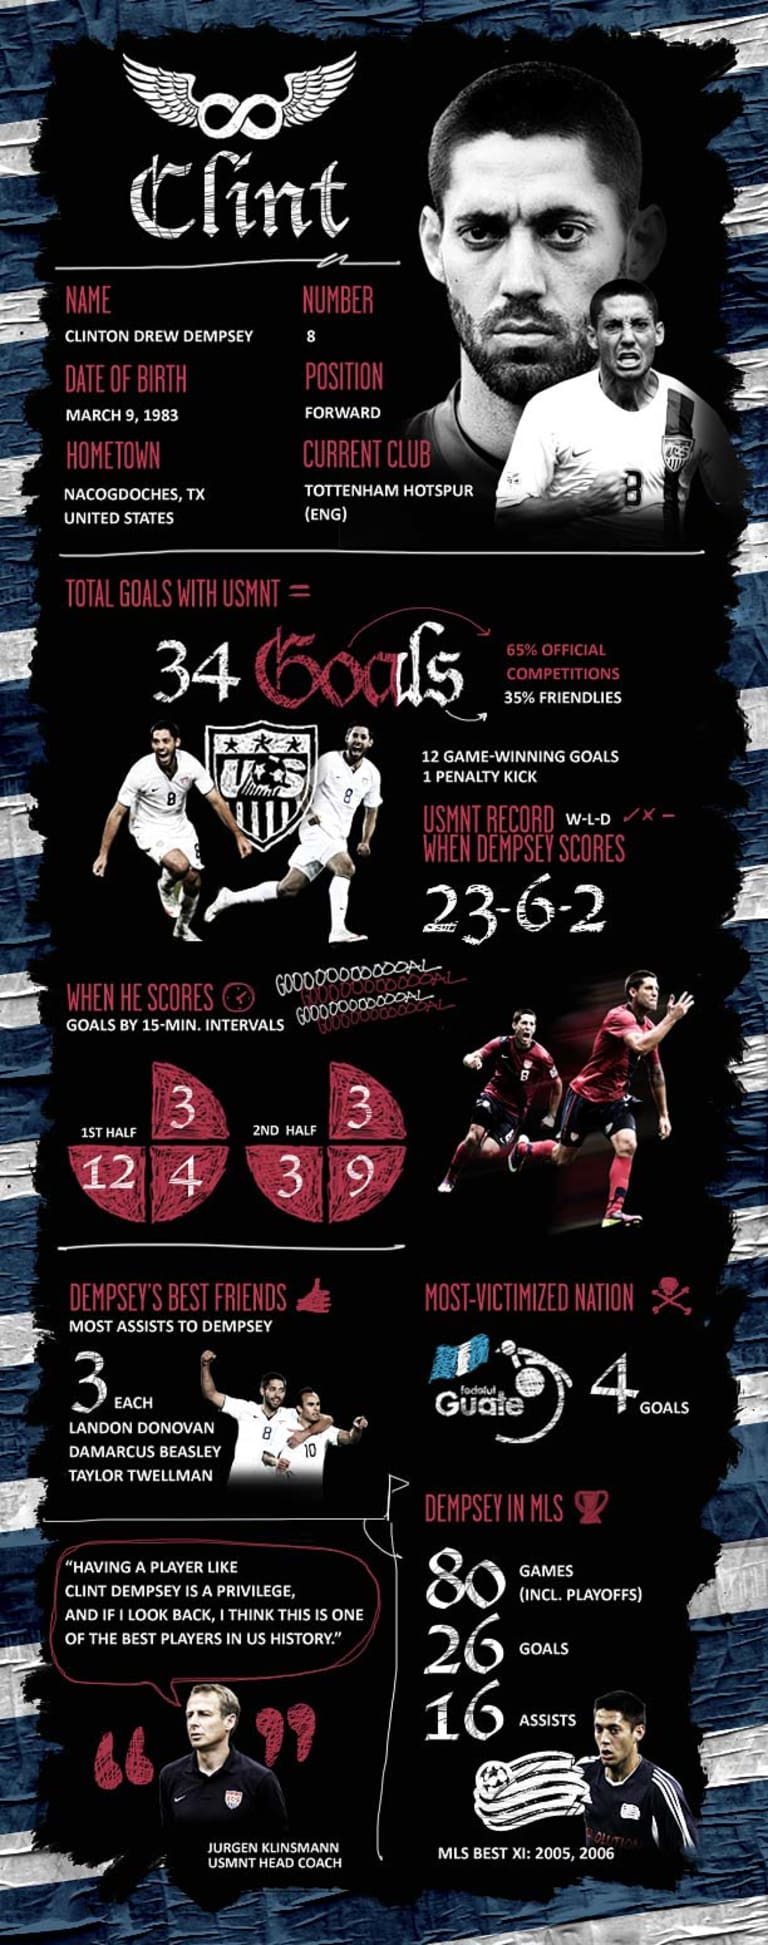 INFOGRAPHIC: The one & only Clint Dempsey with the USMNT -